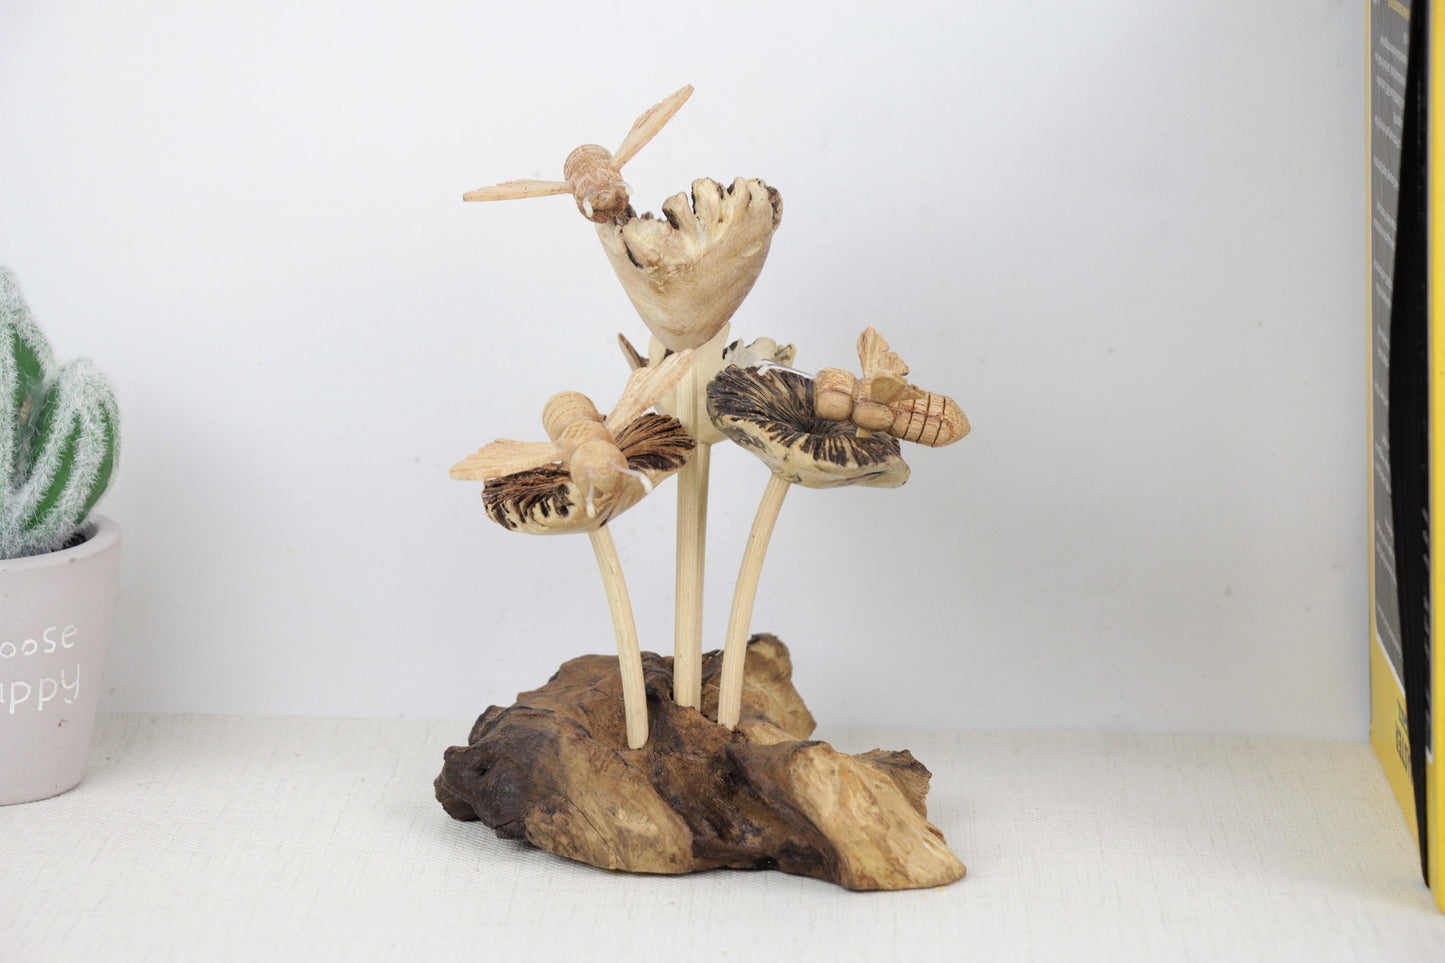 Wooden Bees on Flowers Sculpture